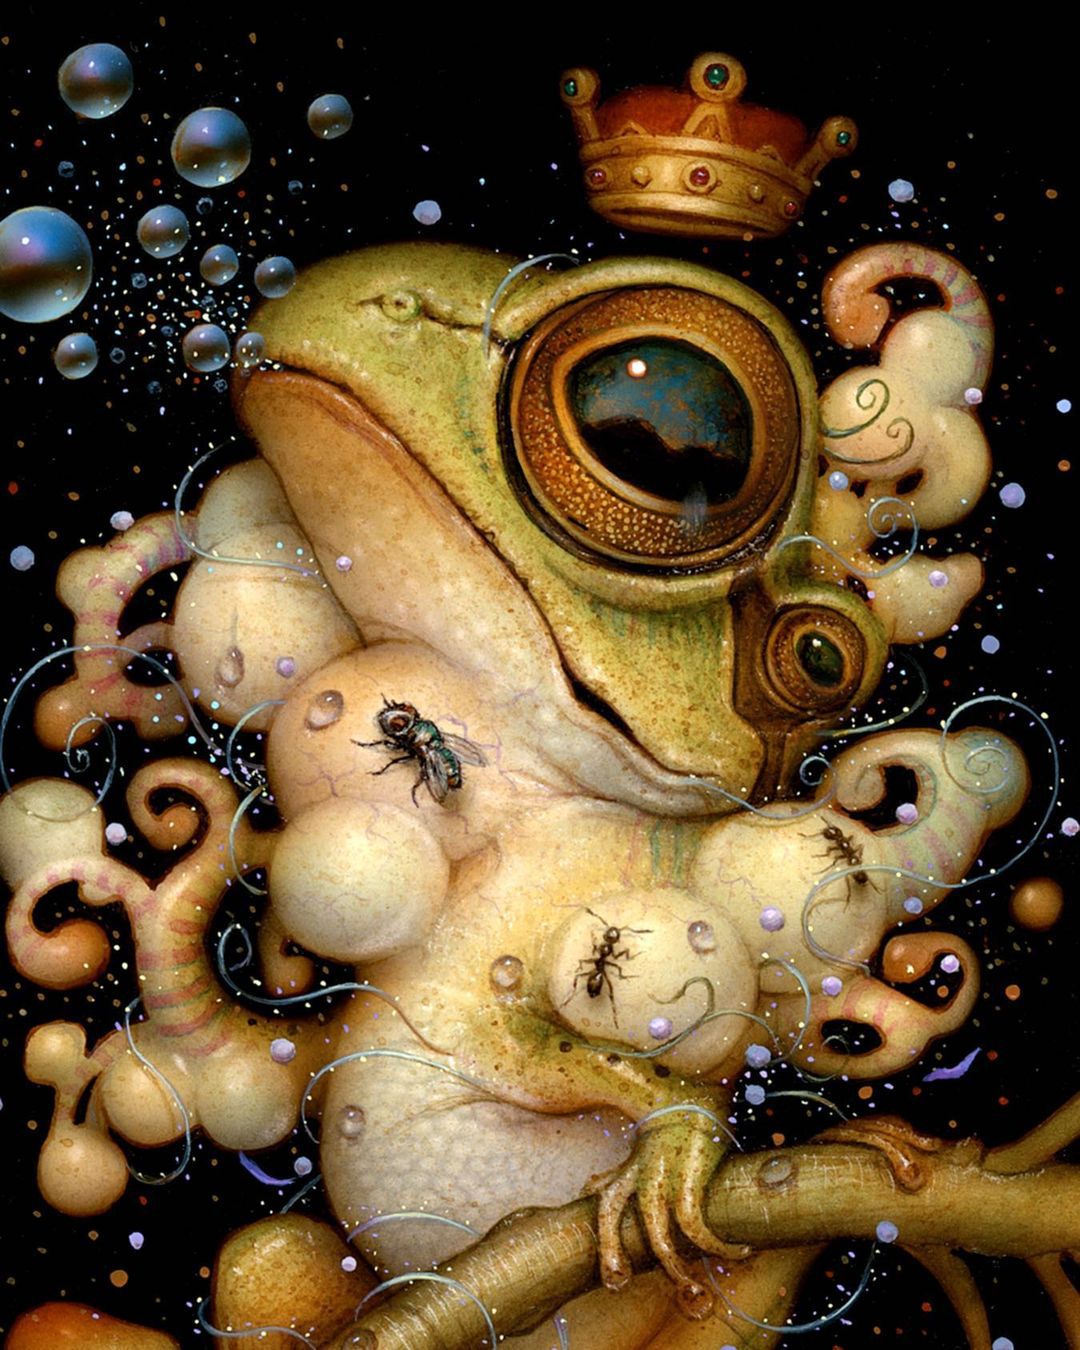 Quirky Fantastical Creatures With Oversized Eyes By Haoto Nattori 15